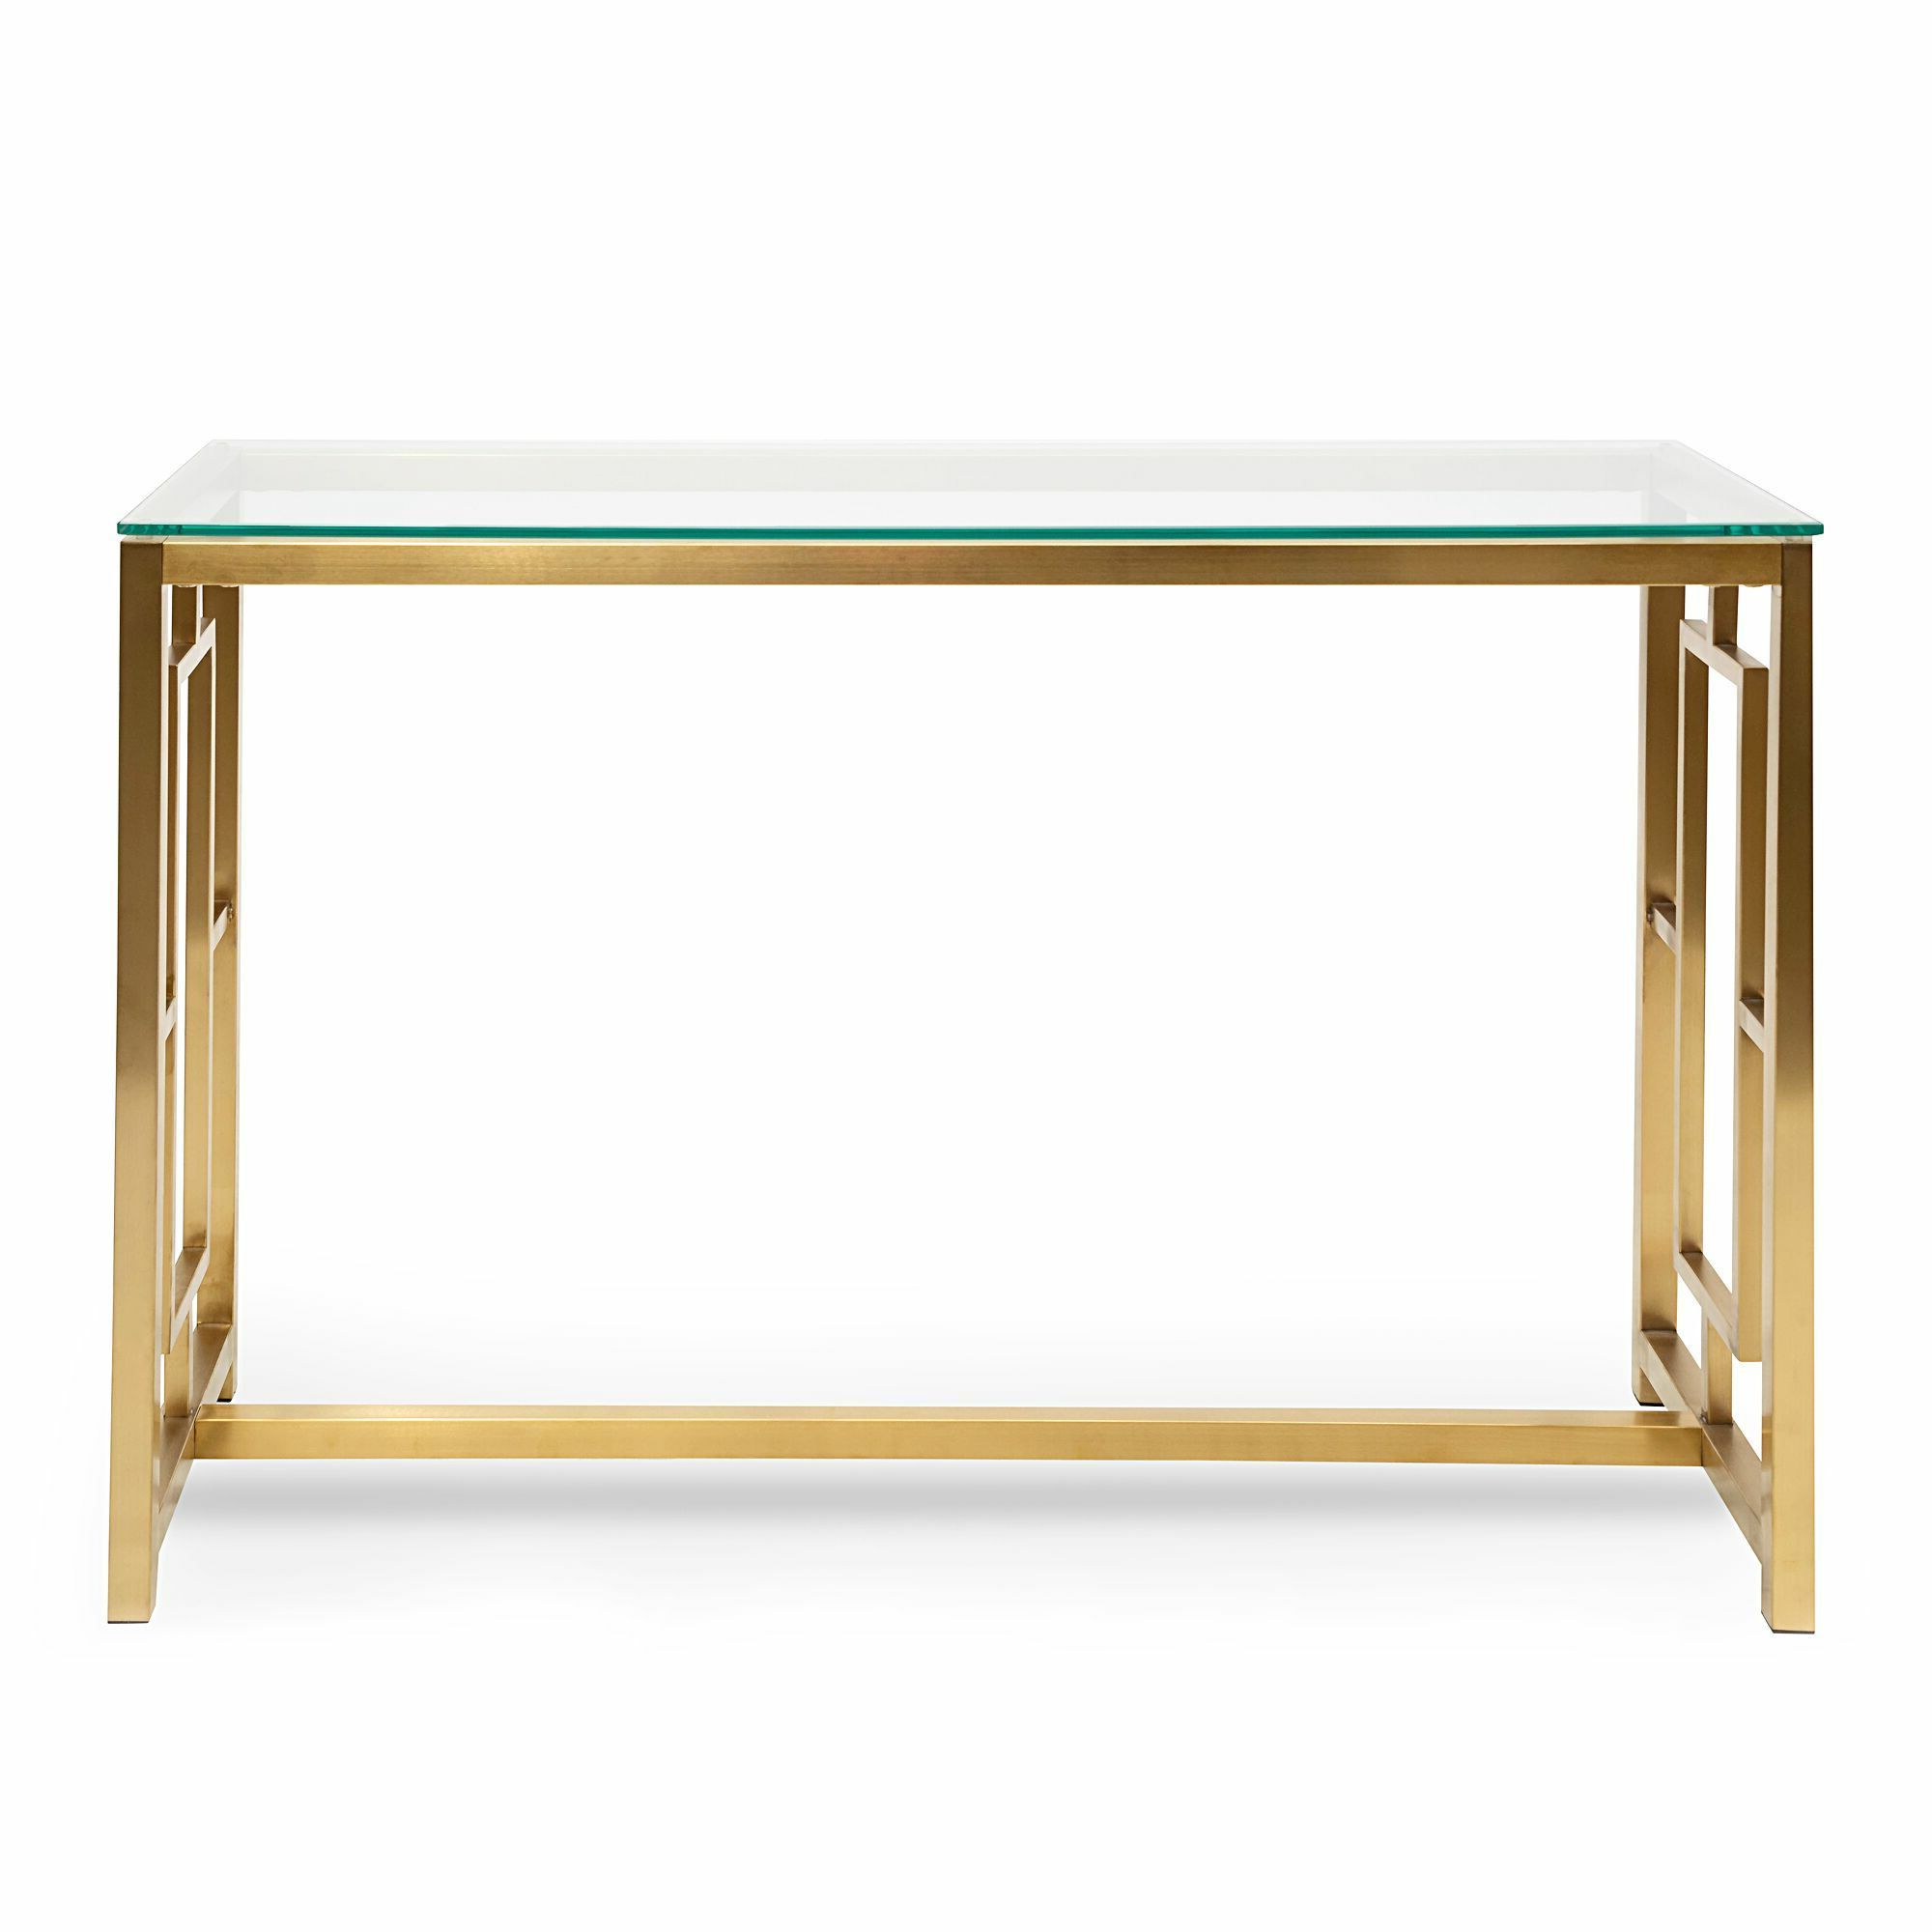 Latest Kater Glass Console Table – Brushed Gold Base – Hammond Intended For Geometric Glass Top Gold Console Tables (View 7 of 10)